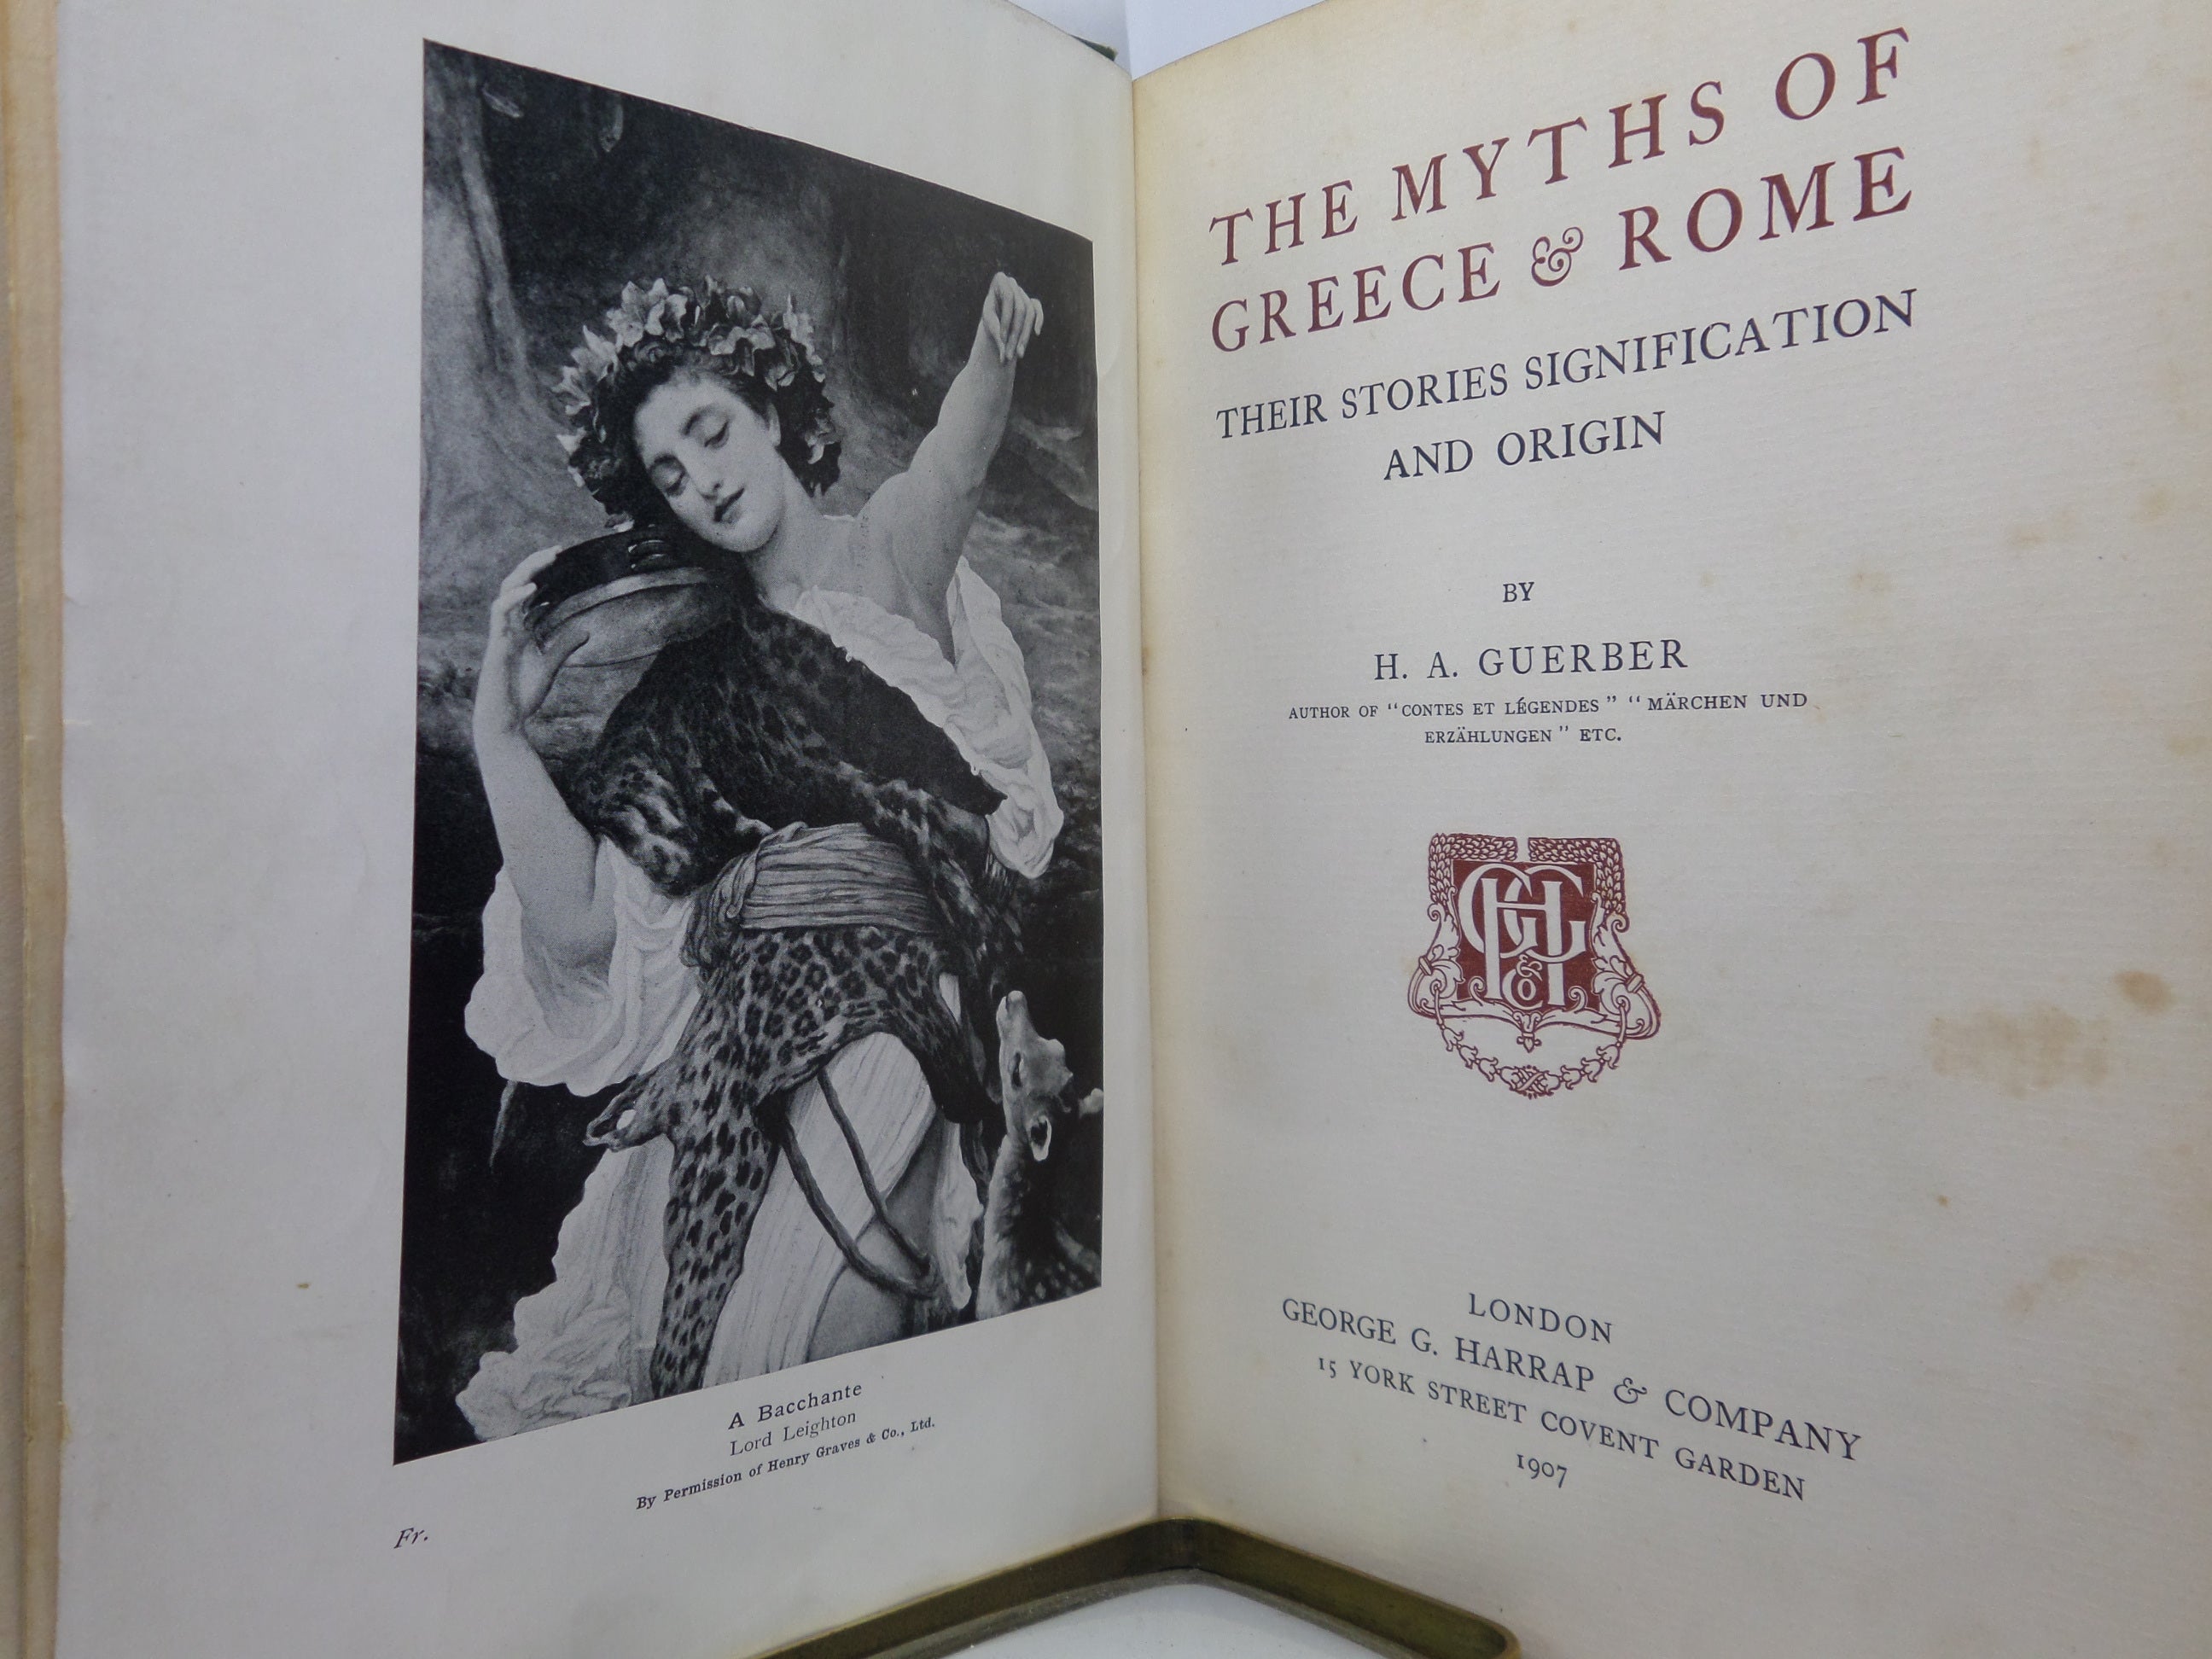 THE MYTHS OF GREECE & ROME BY H. A. GUERBER 1907 FIRST EDITION, ILLUSTRATED